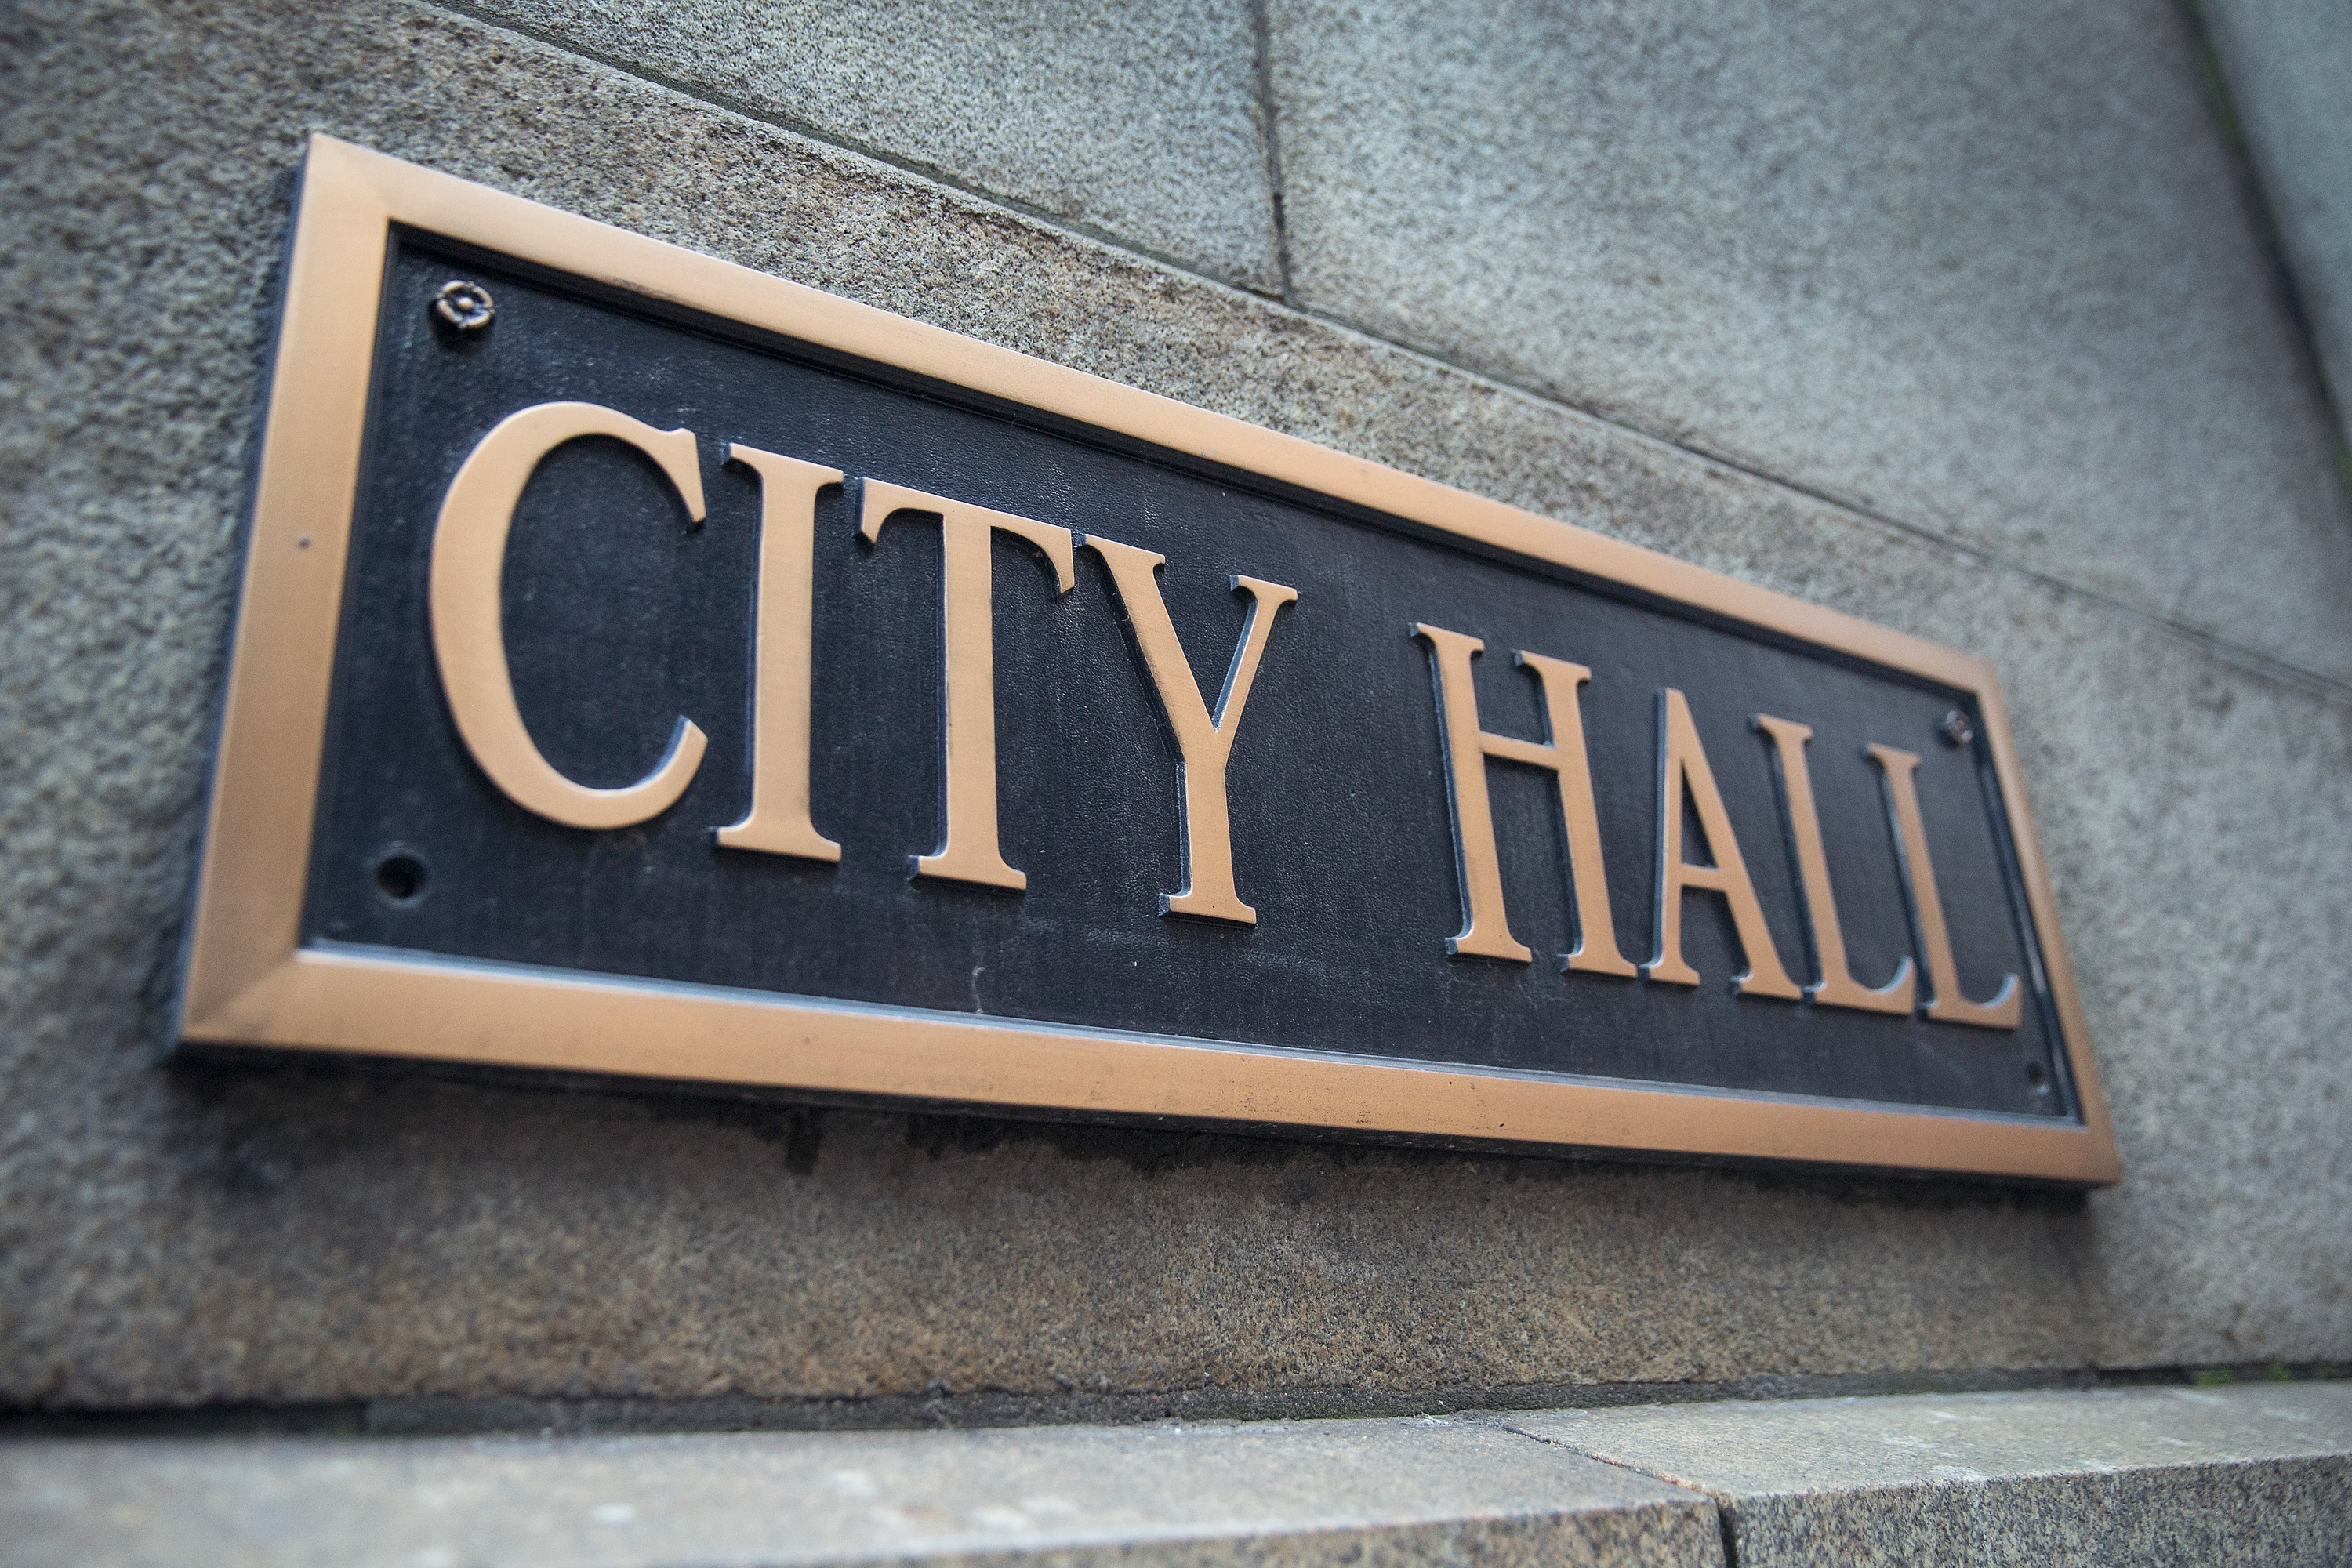 City Hall, County Building To Be Closed Tomorrow As ...